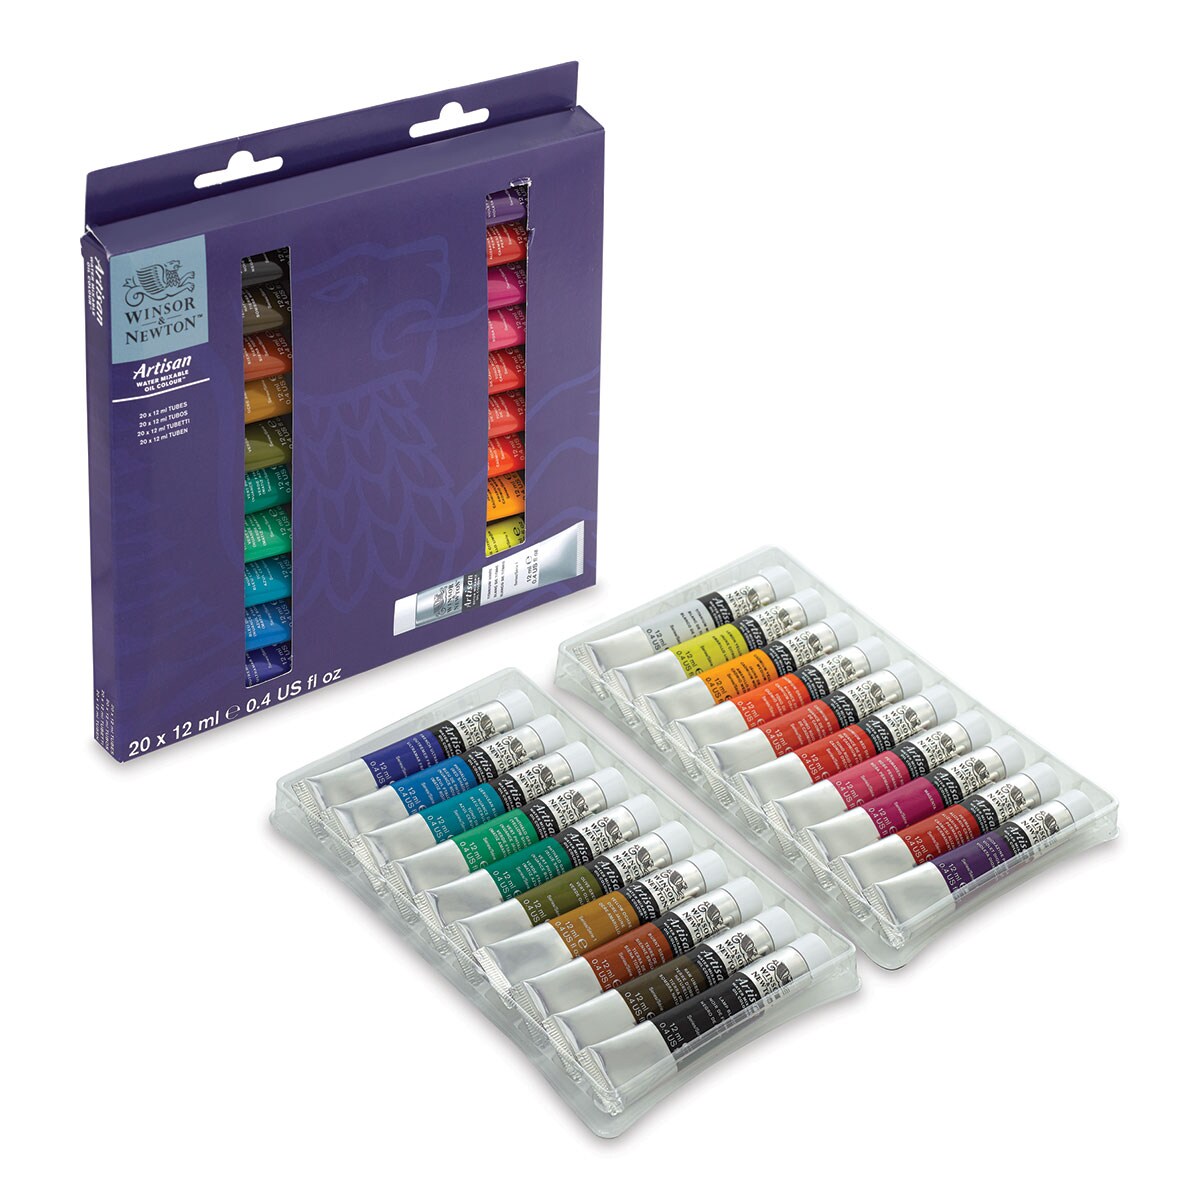 Winsor &#x26; Newton Artisan Water Mixable Oil Paint - Set of 20, Assorted Colors, 12 ml, Tubes